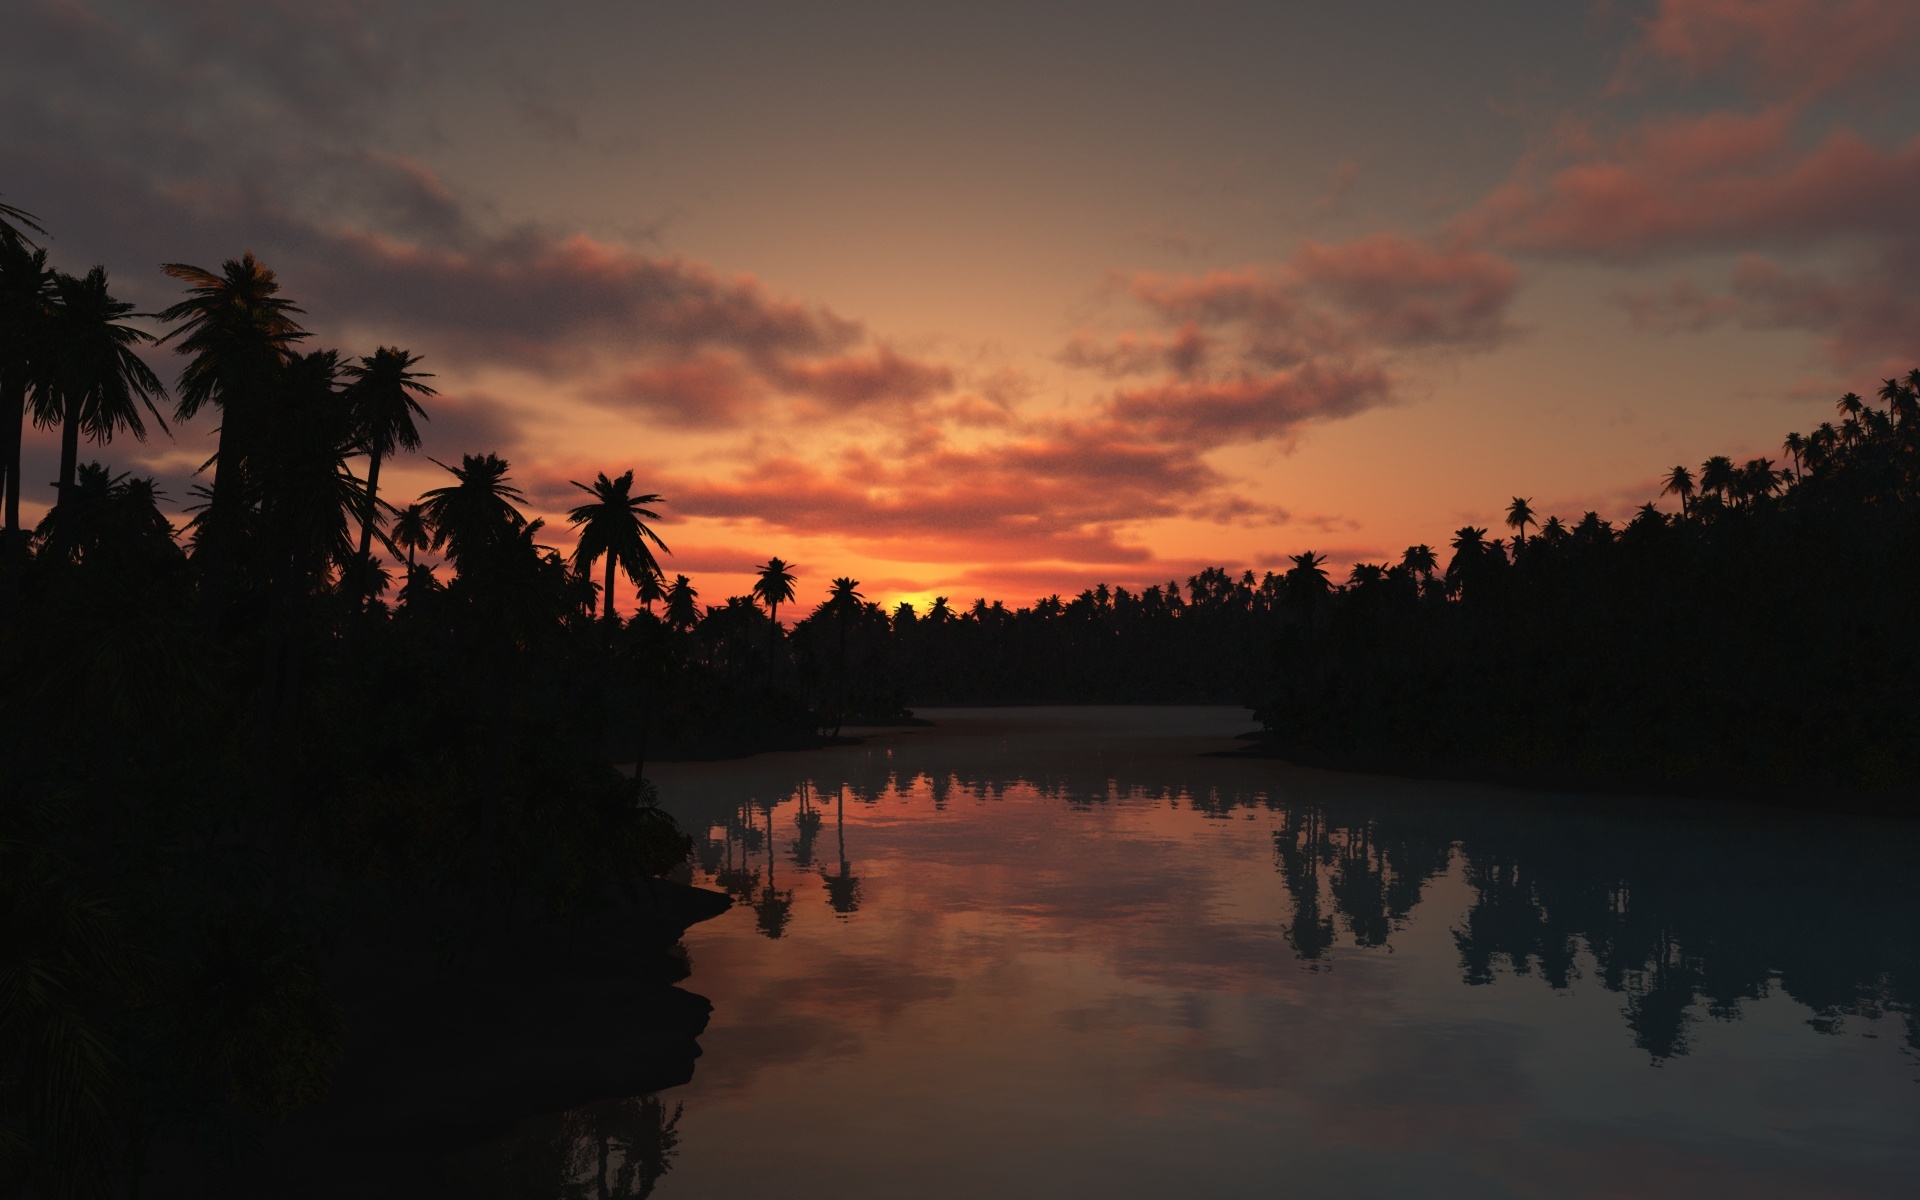 Sunset Over Lake and Palms